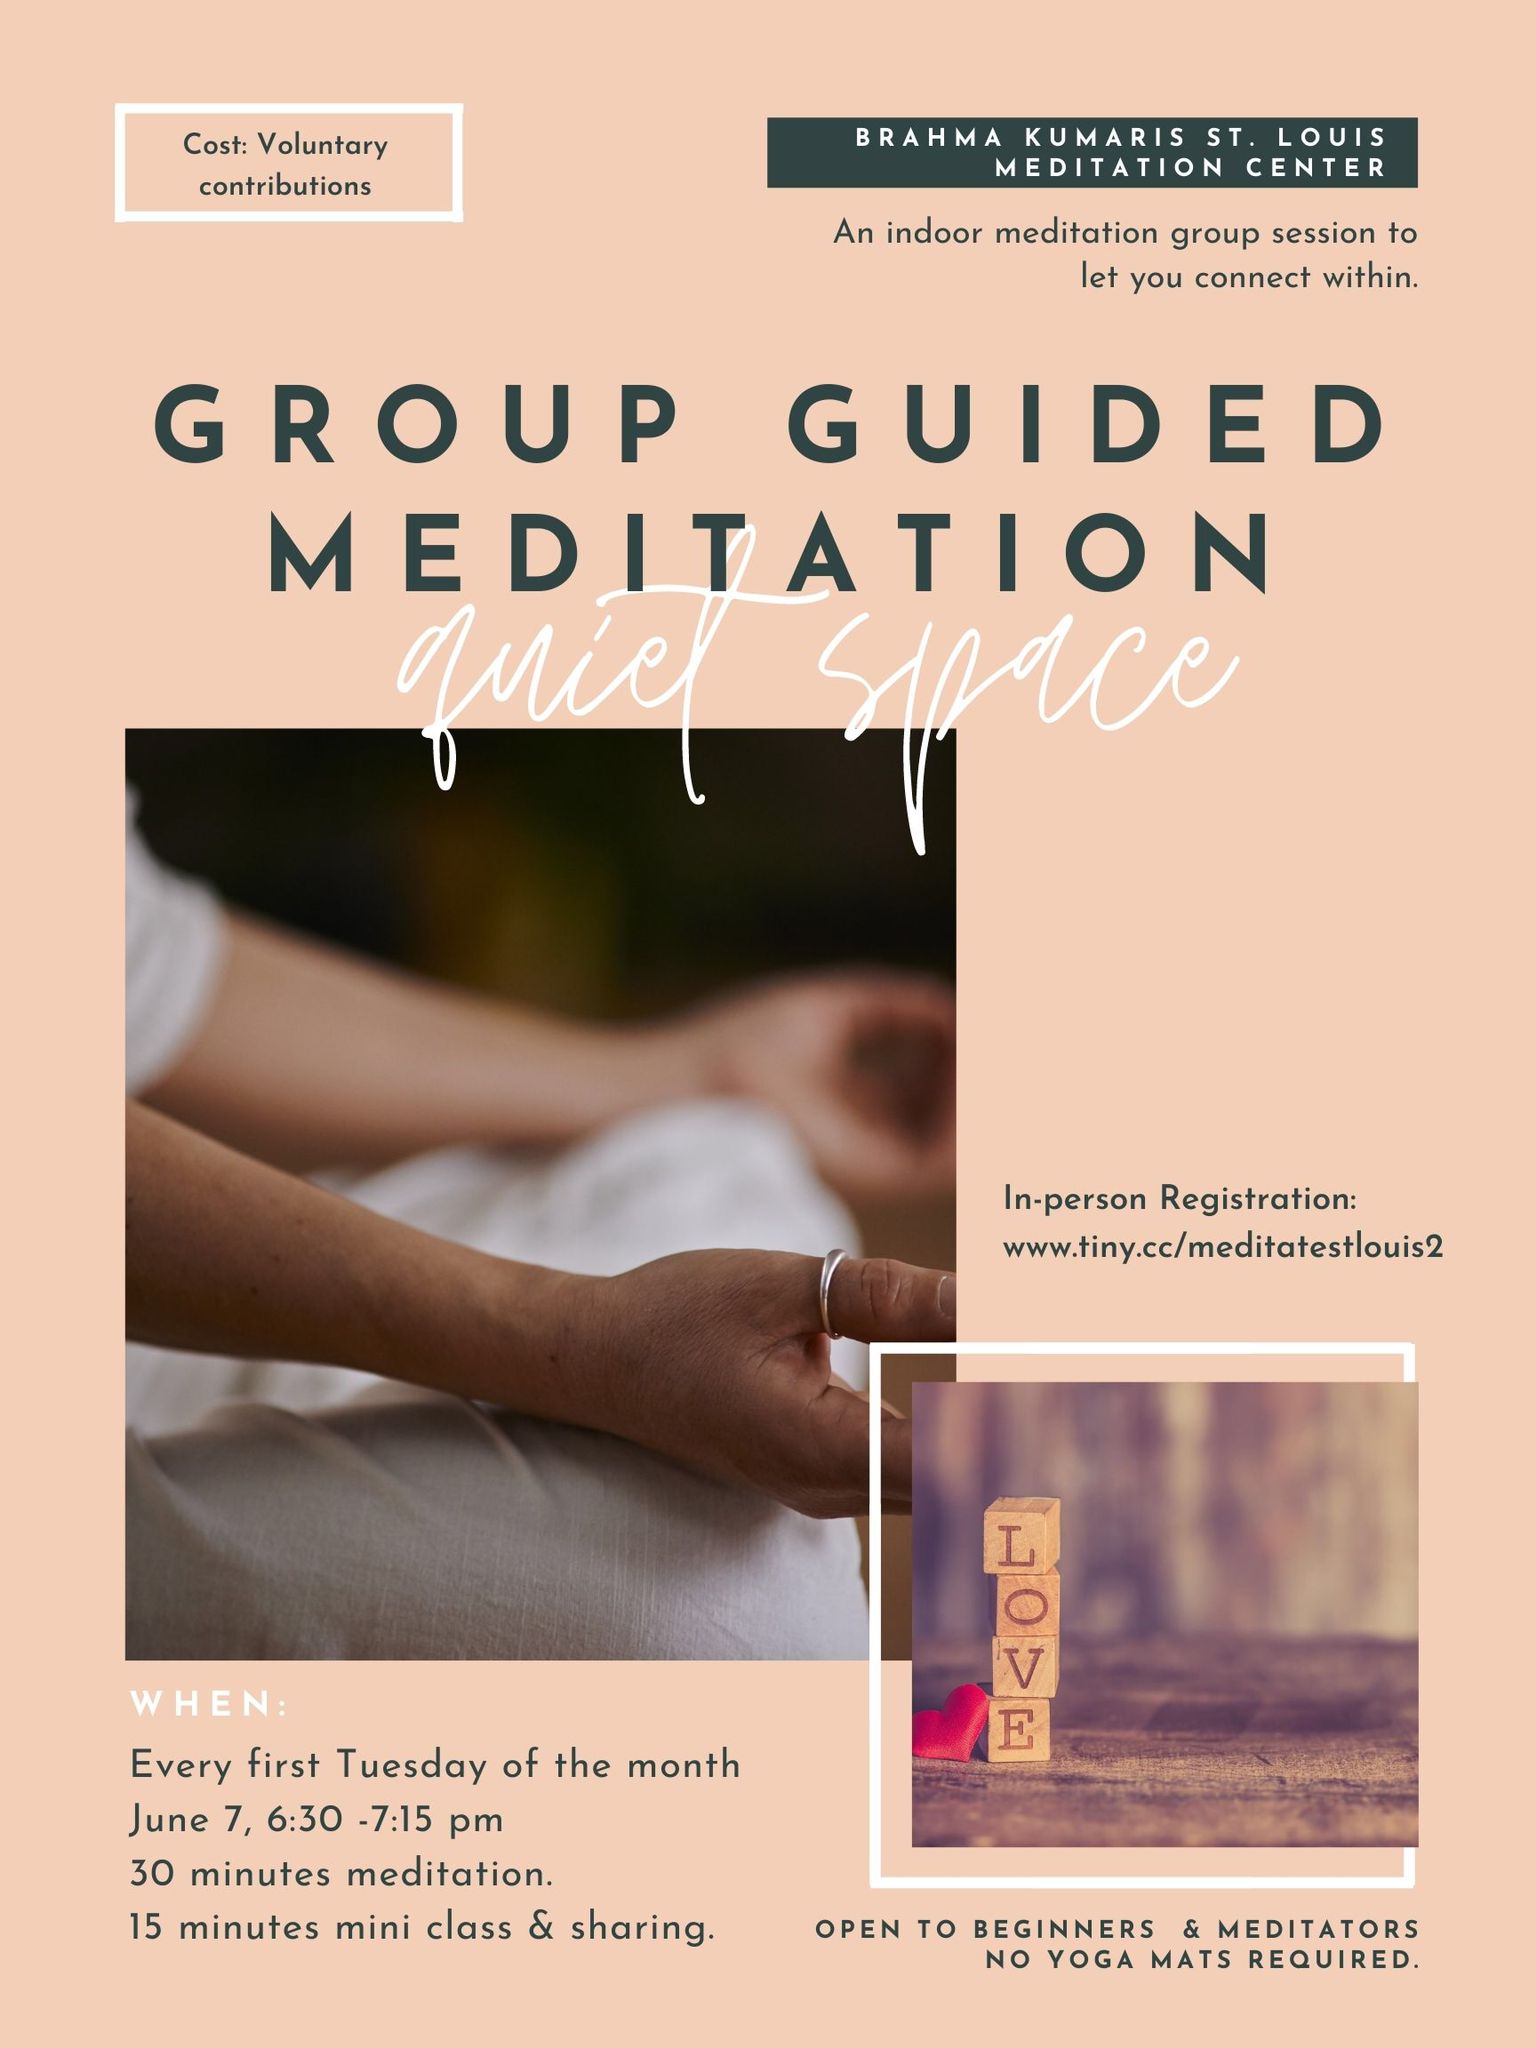 GROUP GUIDED MEDITATION